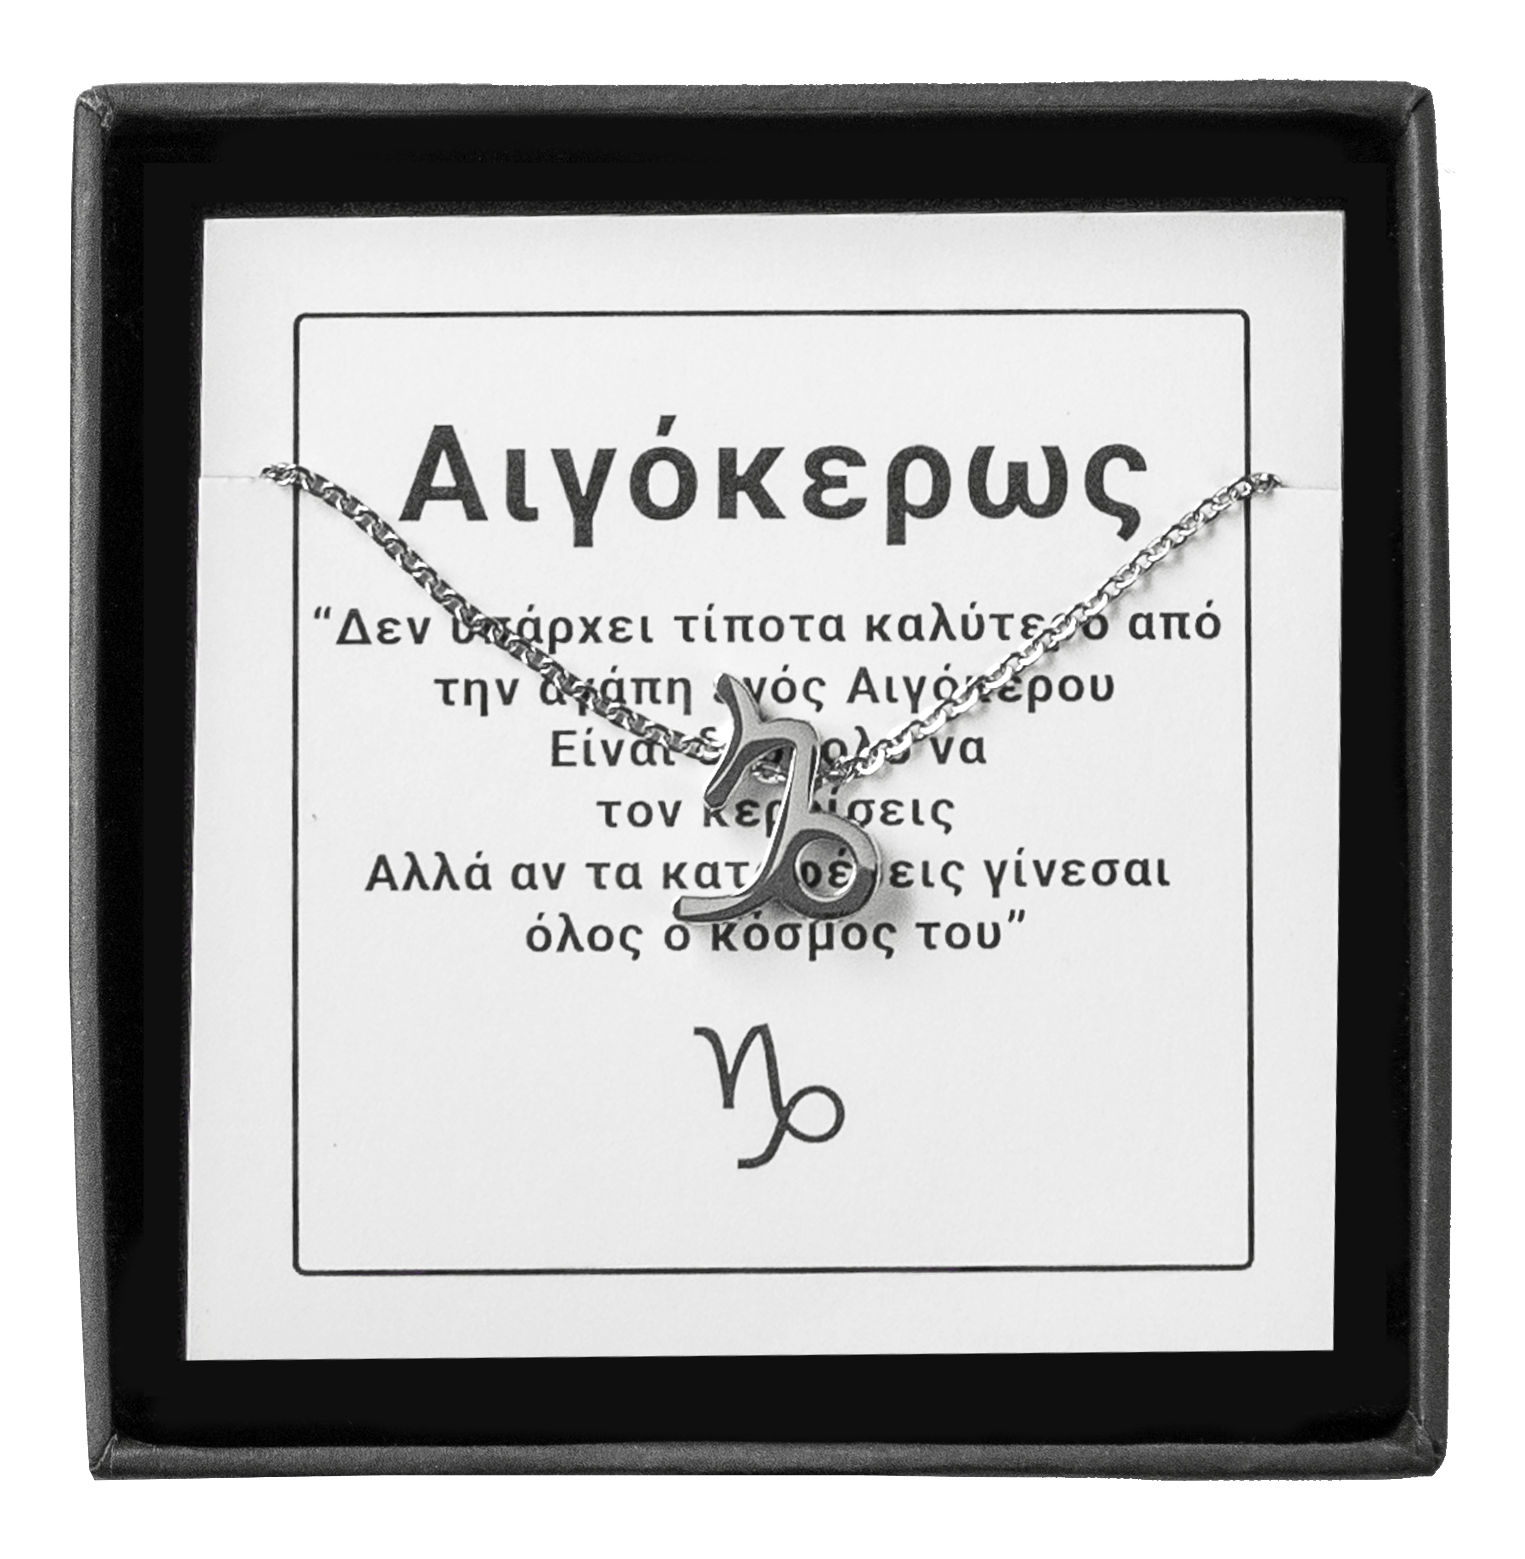 bianco rosso Necklaces Capricorn - Necklace cyprus greece jewelry gift free shipping europe worldwide